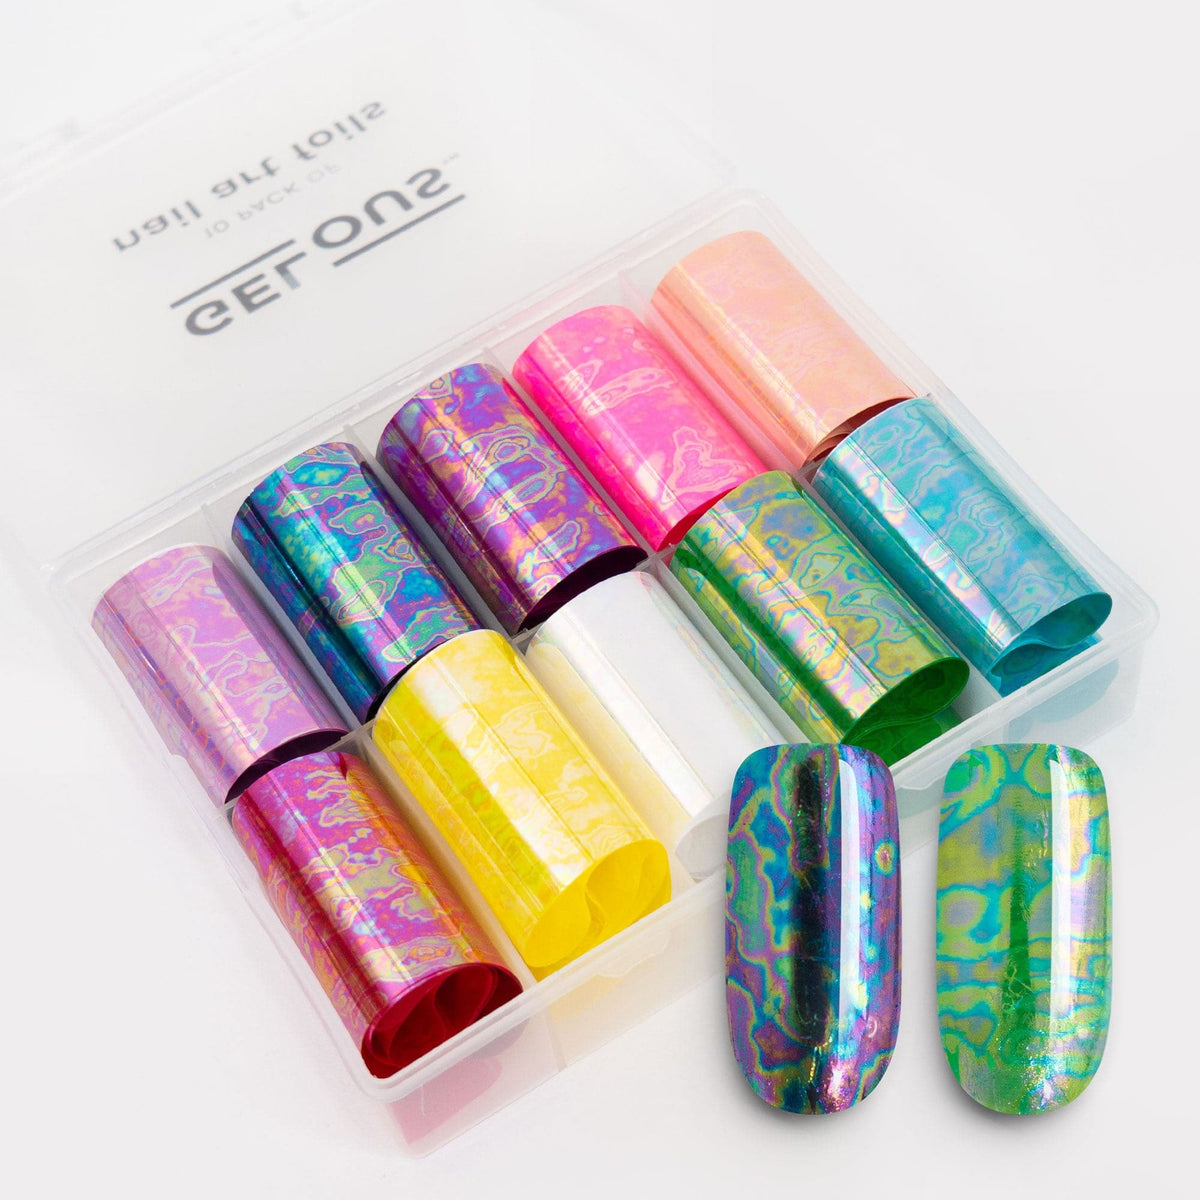 Gelous Colourful Iridescence Nail Art Foils product photo - photographed in Australia